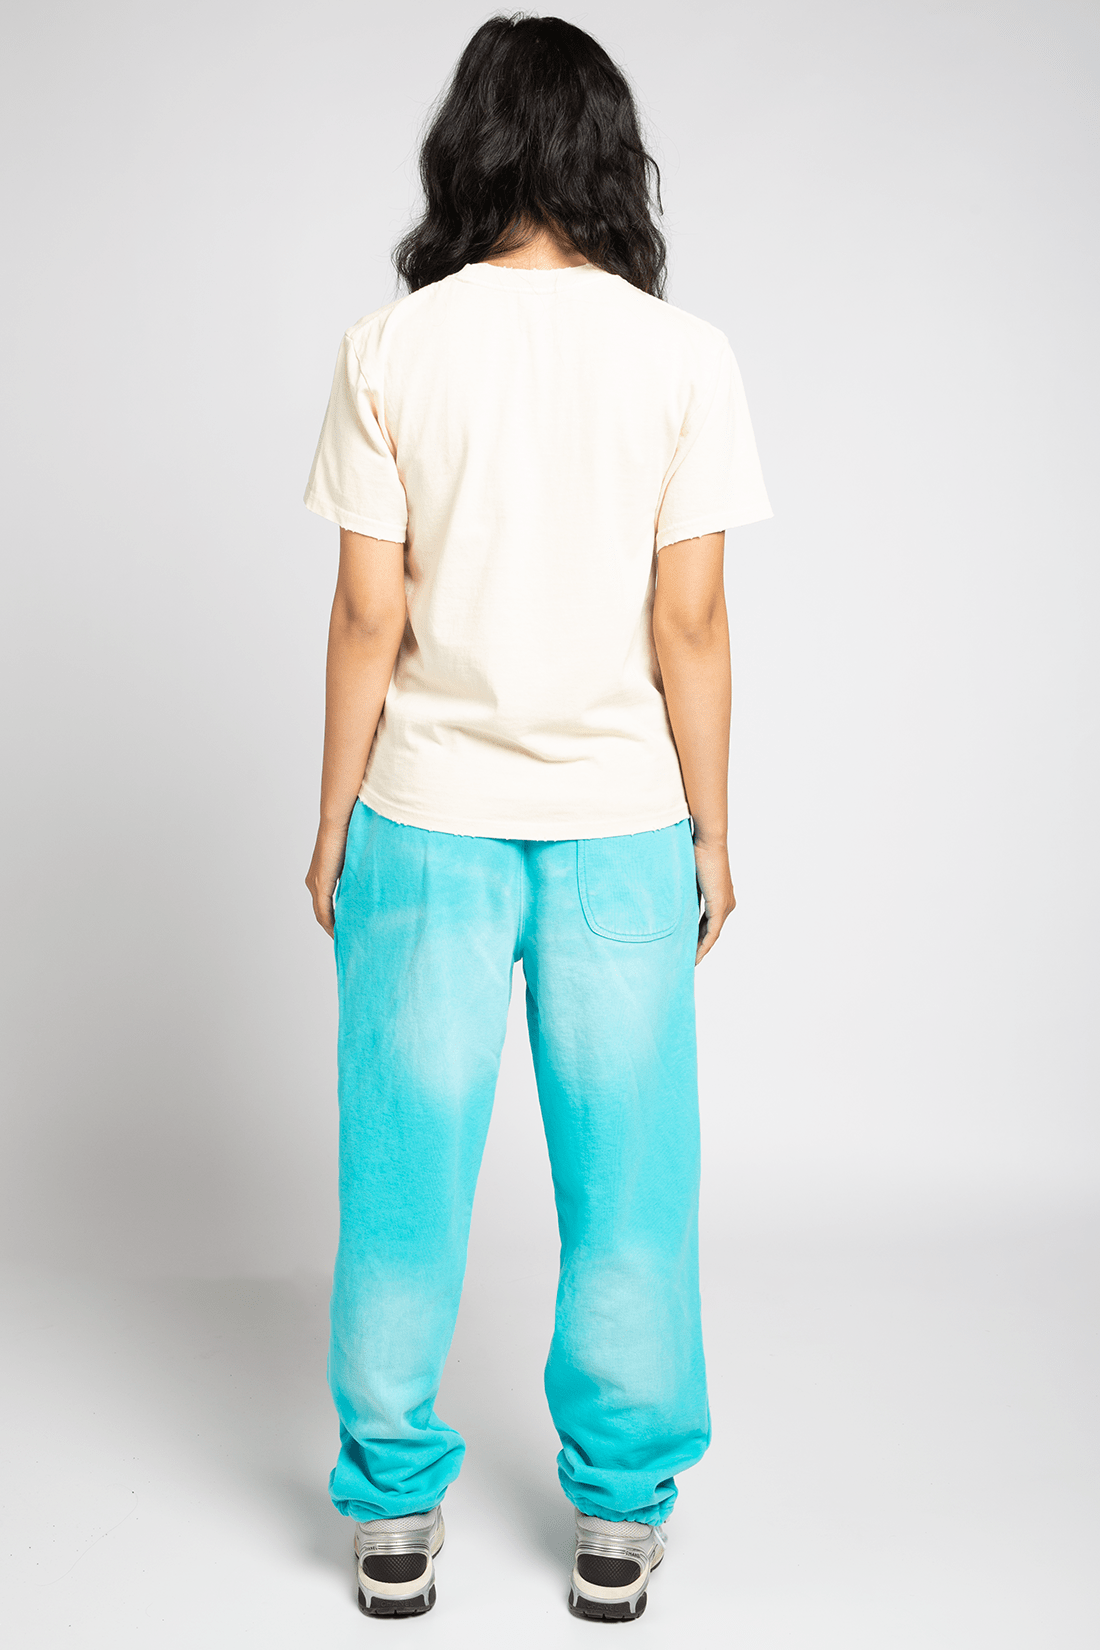 Exclusive Recess – Blue Sweatpants MADE Offshore Faded 